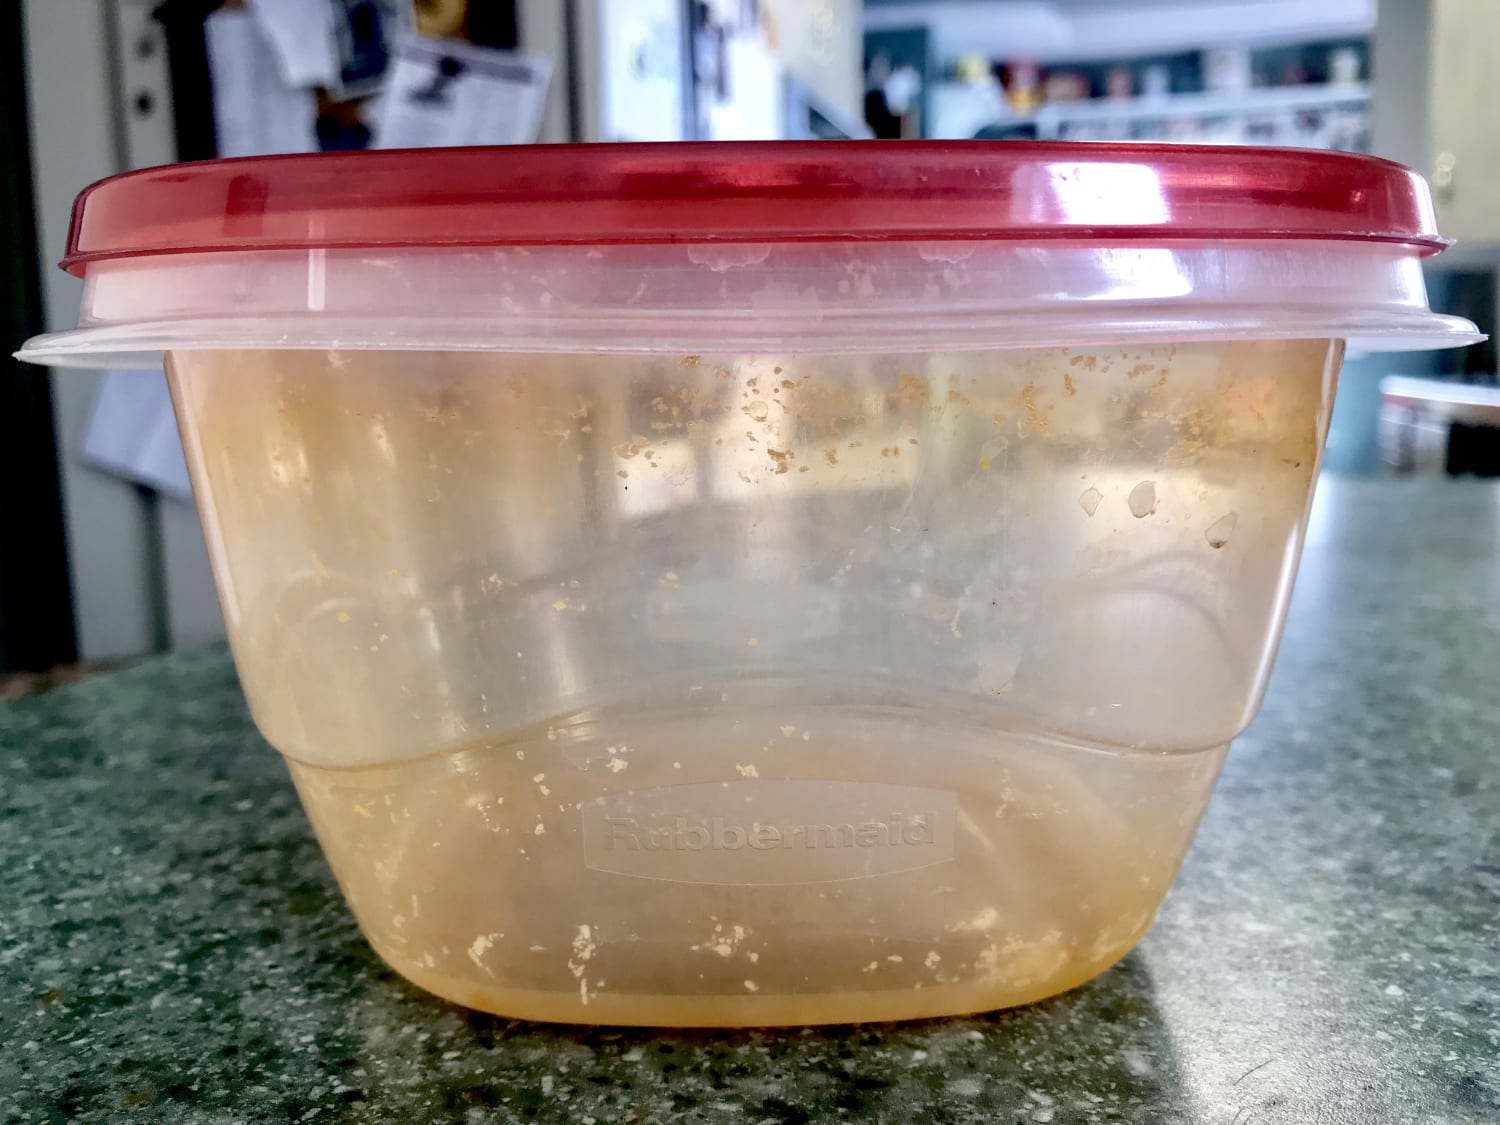 https://media-cldnry.s-nbcnews.com/image/upload/newscms/2019_15/1424660/stained_plastic_rubbermaid-best_glass_storage_containers-041019.jpg